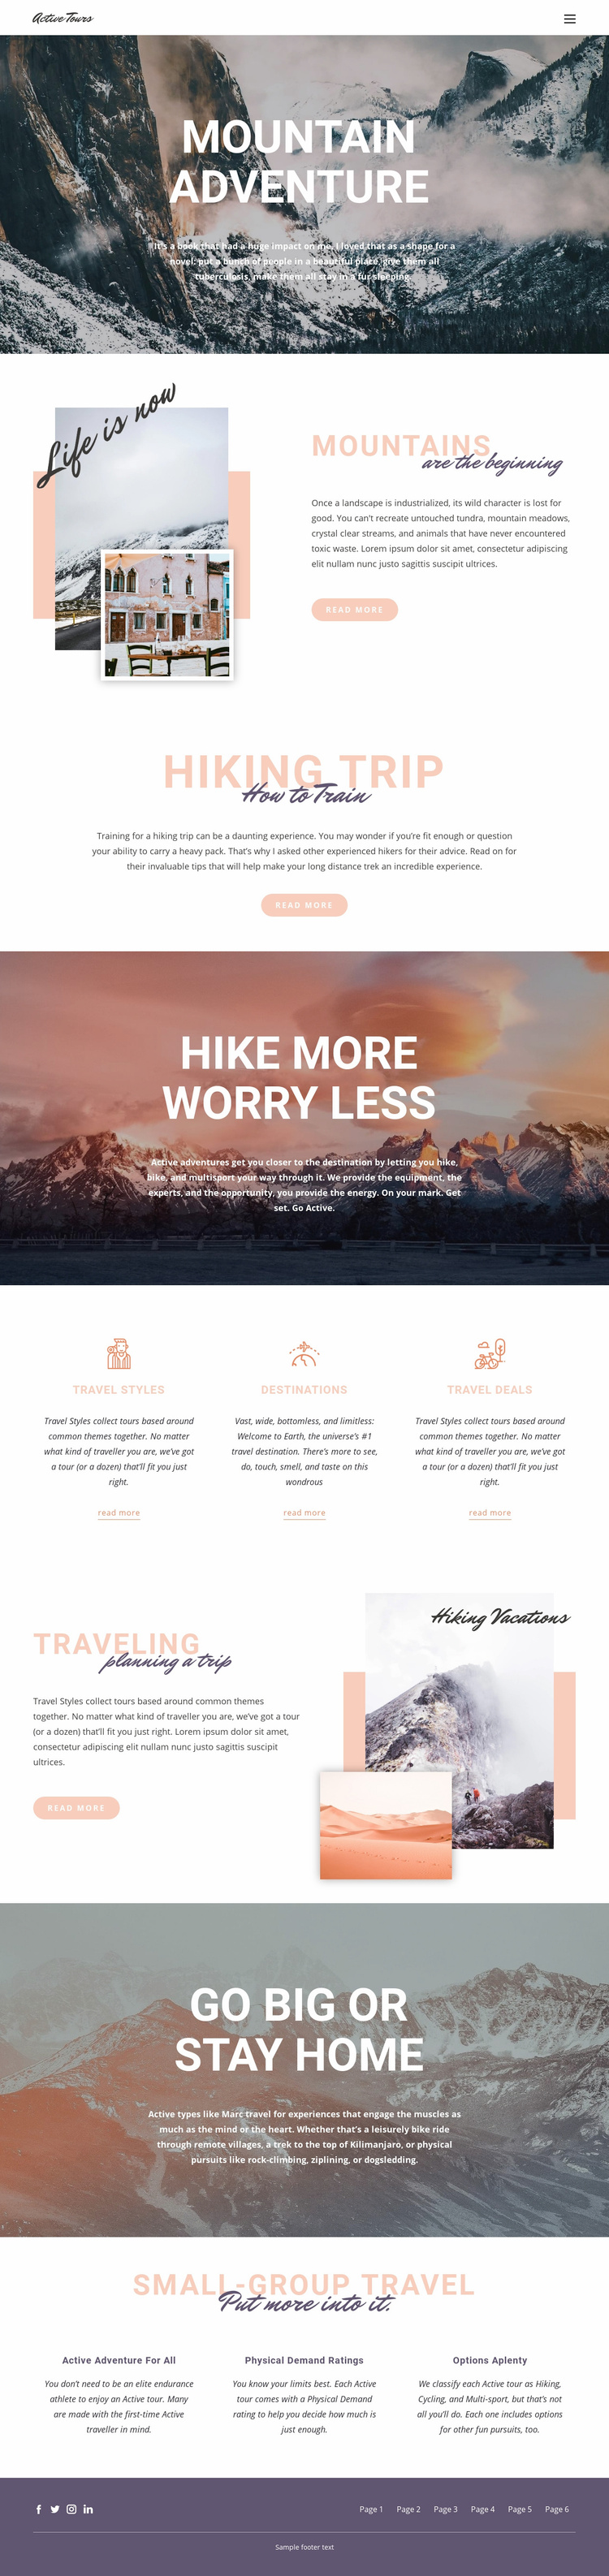 Guided backpacking trips Wix Template Alternative